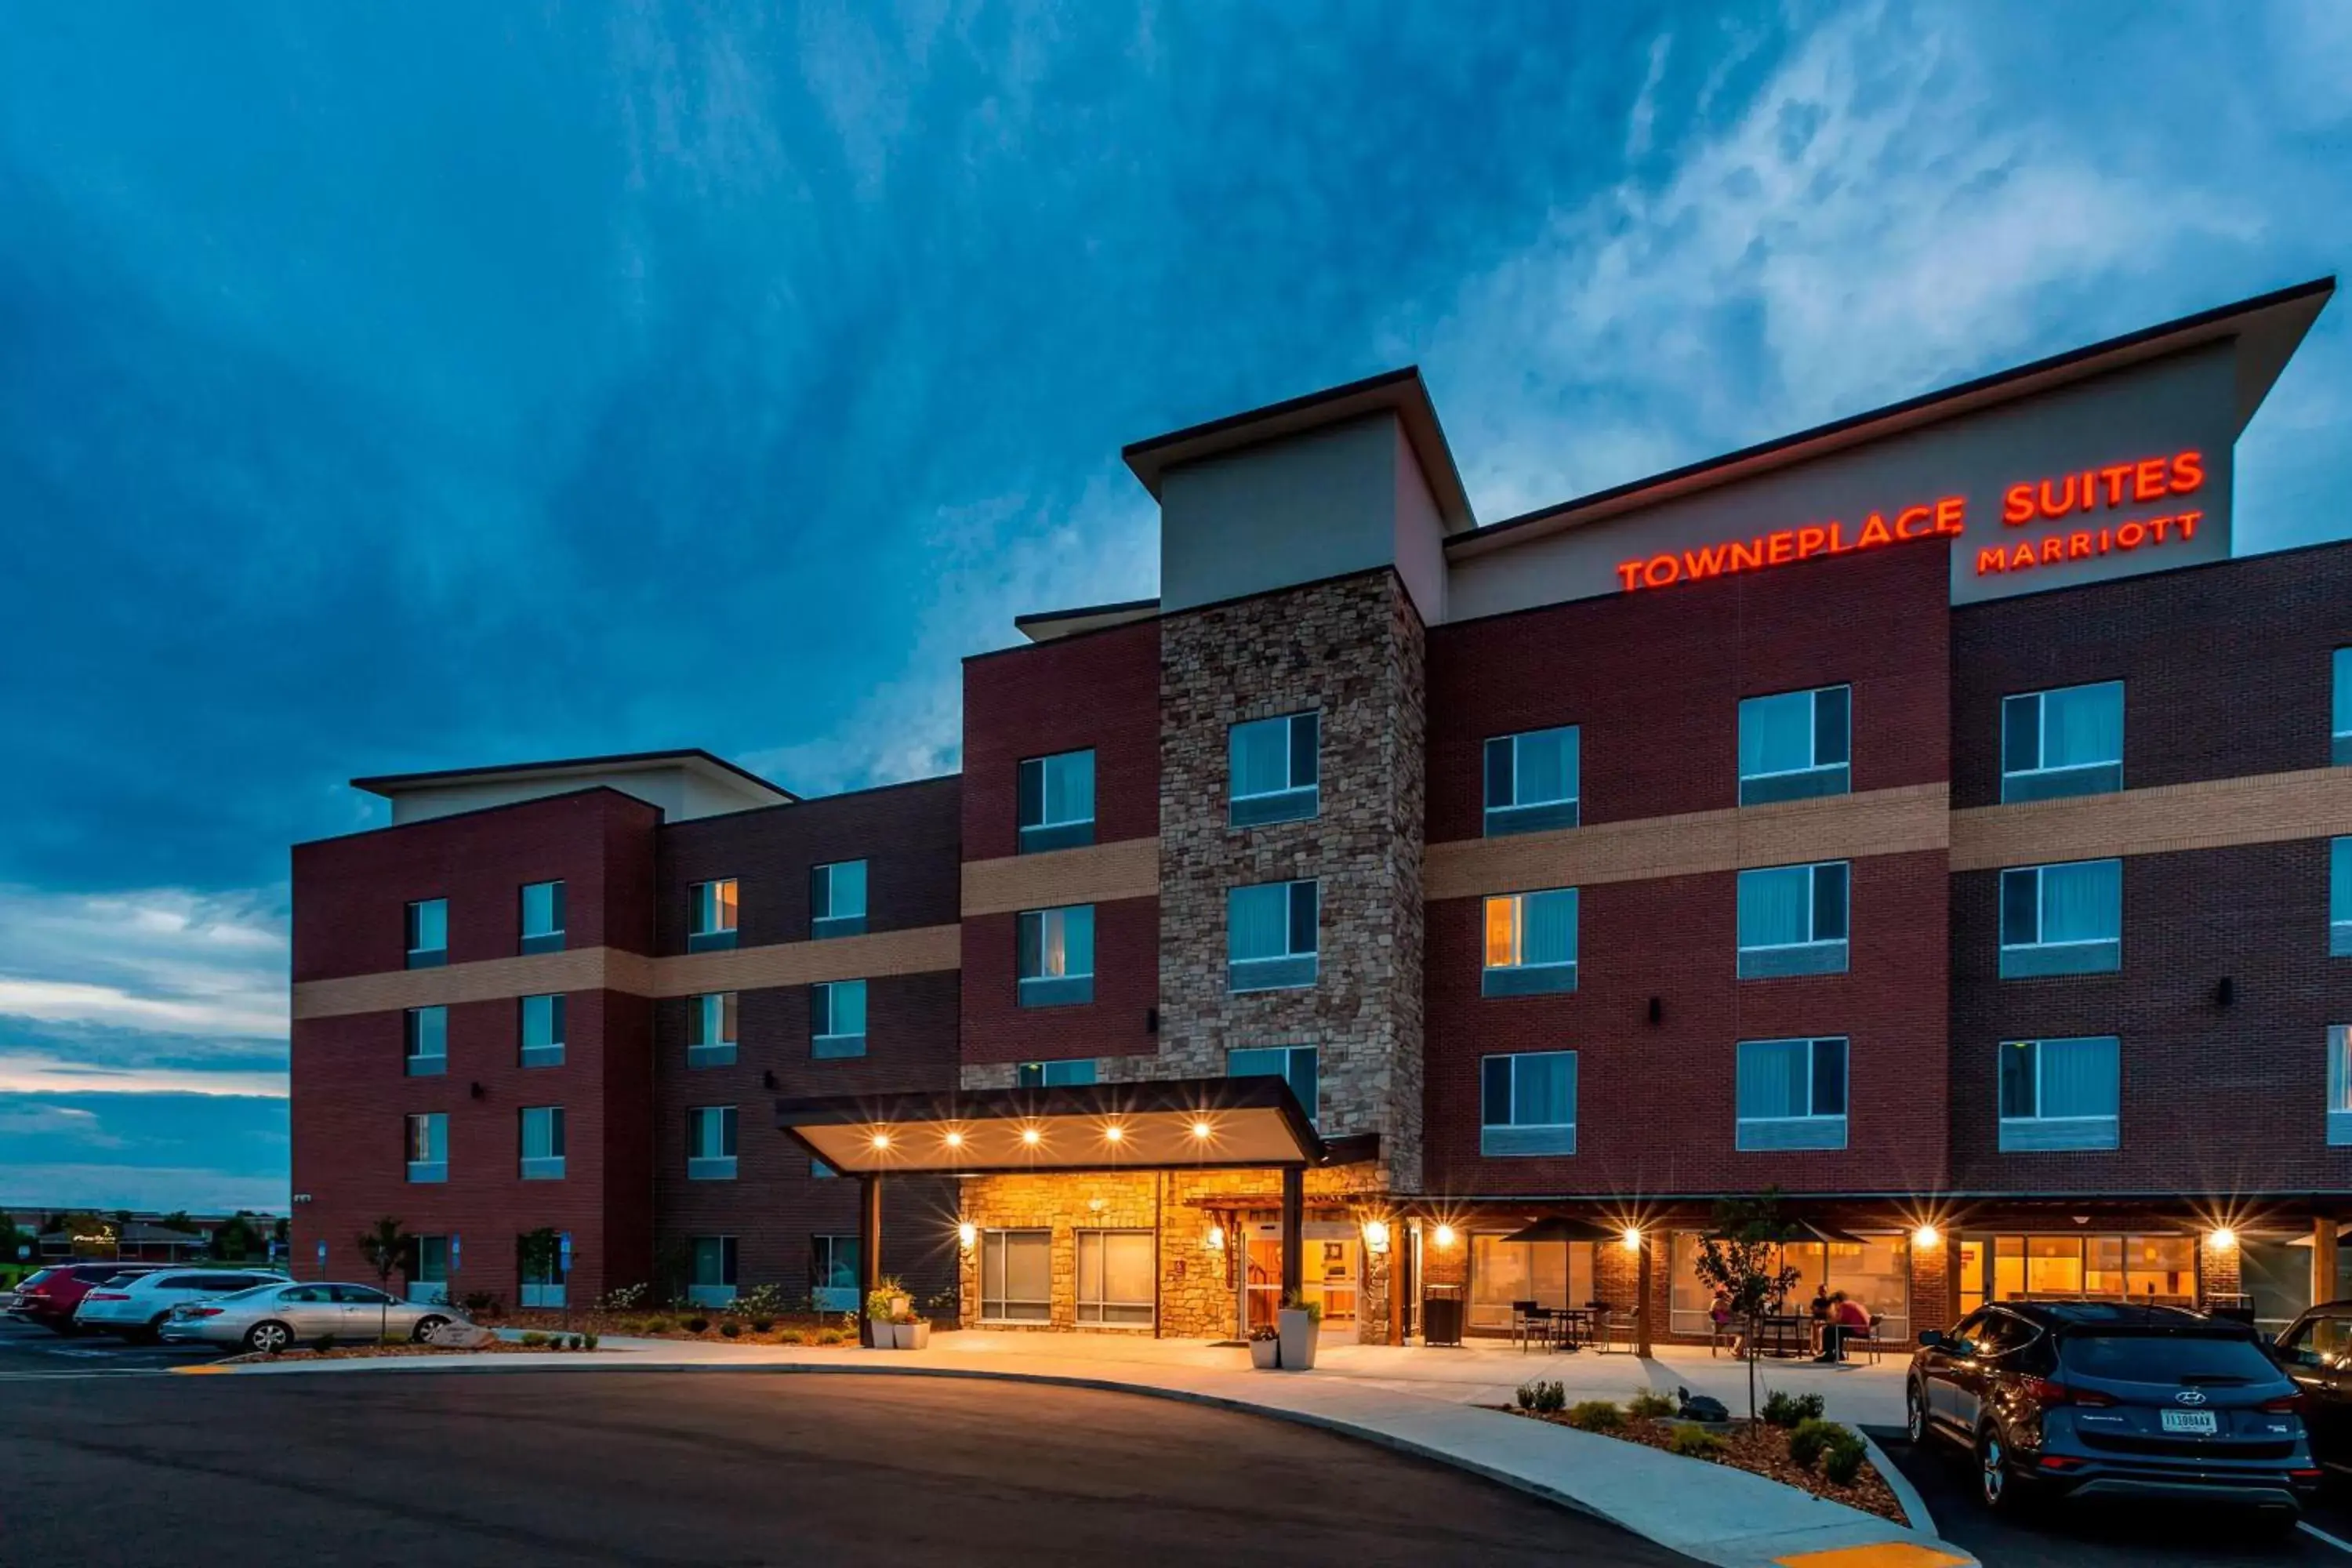 Property Building in TownePlace Suites by Marriott Lexington Keeneland/Airport